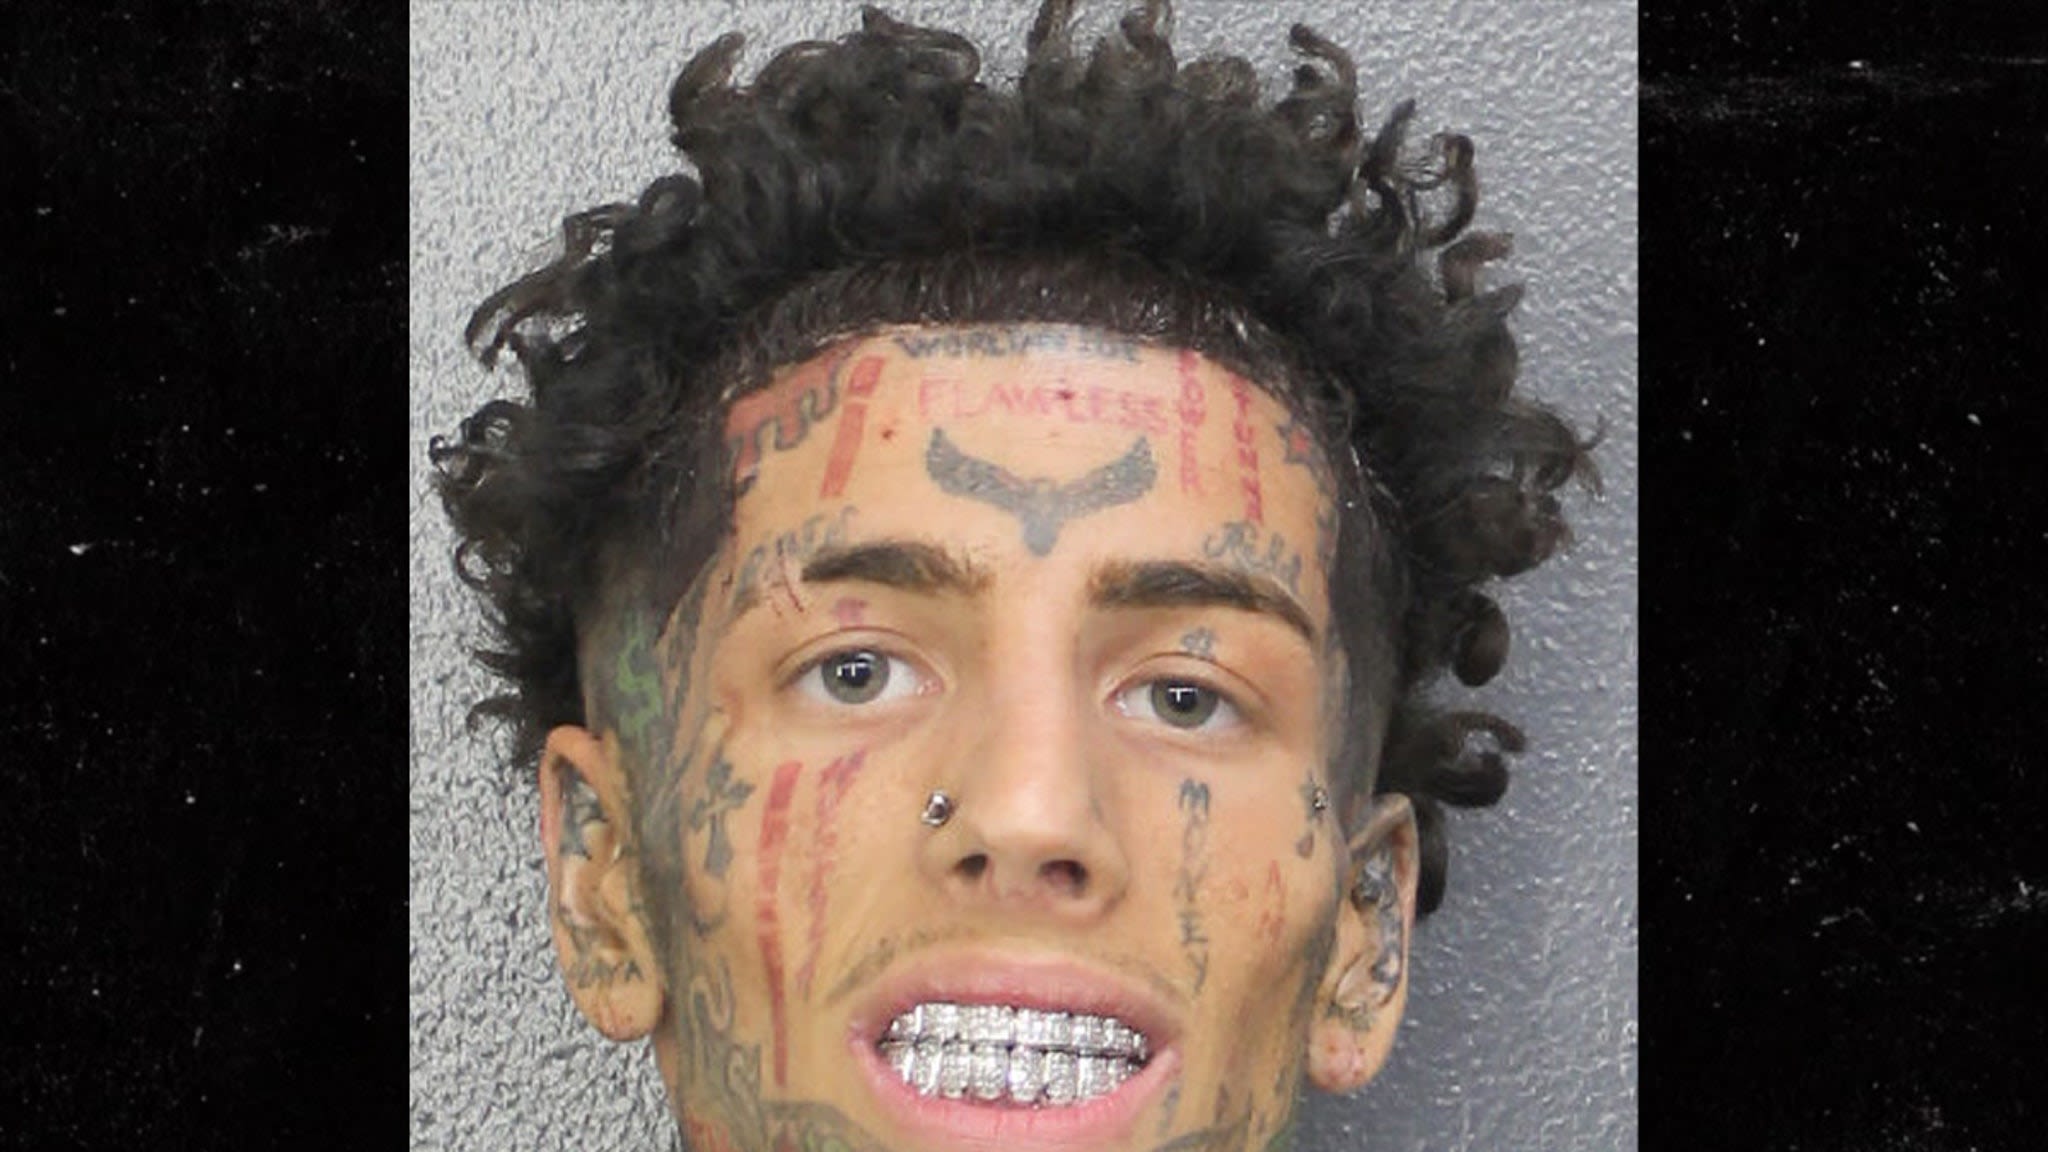 Island Boys' Franky Venegas Arrested For Driving Offenses in Florida